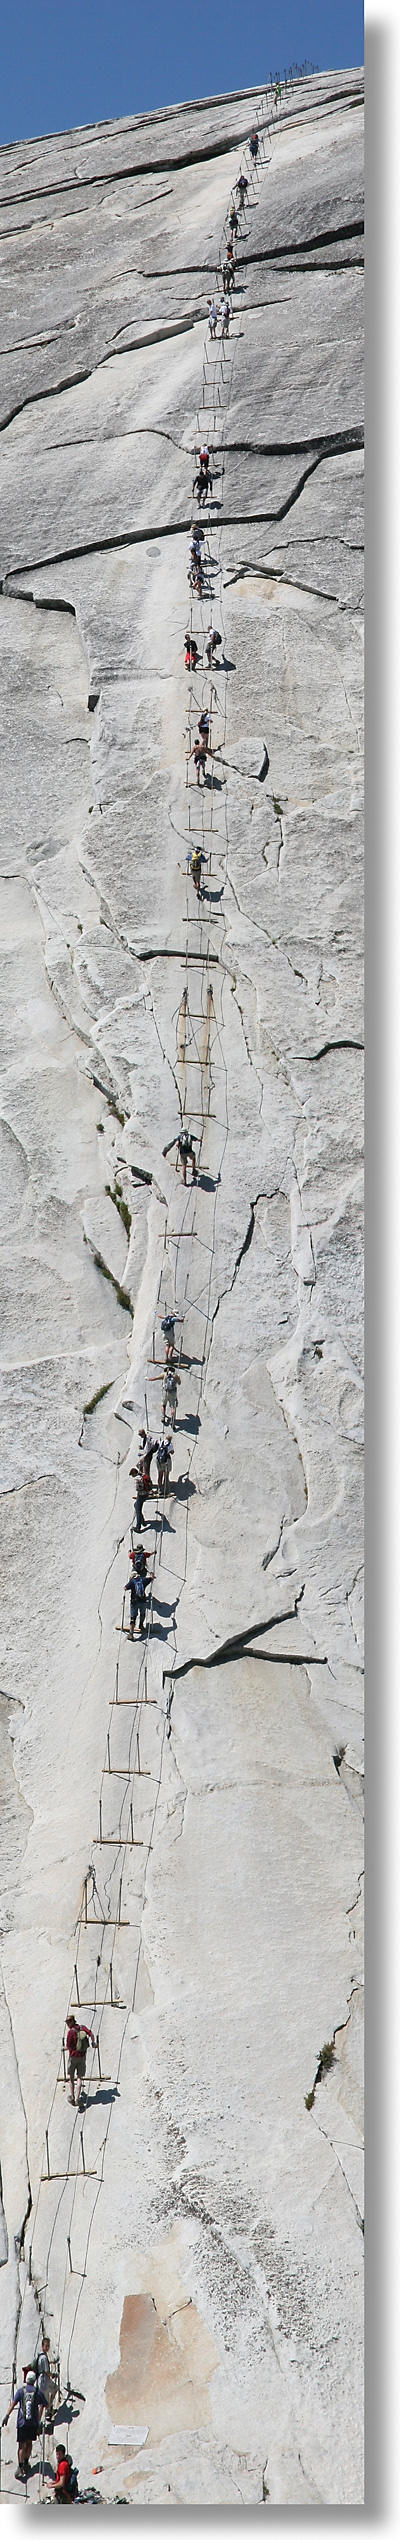 The Half Dome cables, from top to bottom